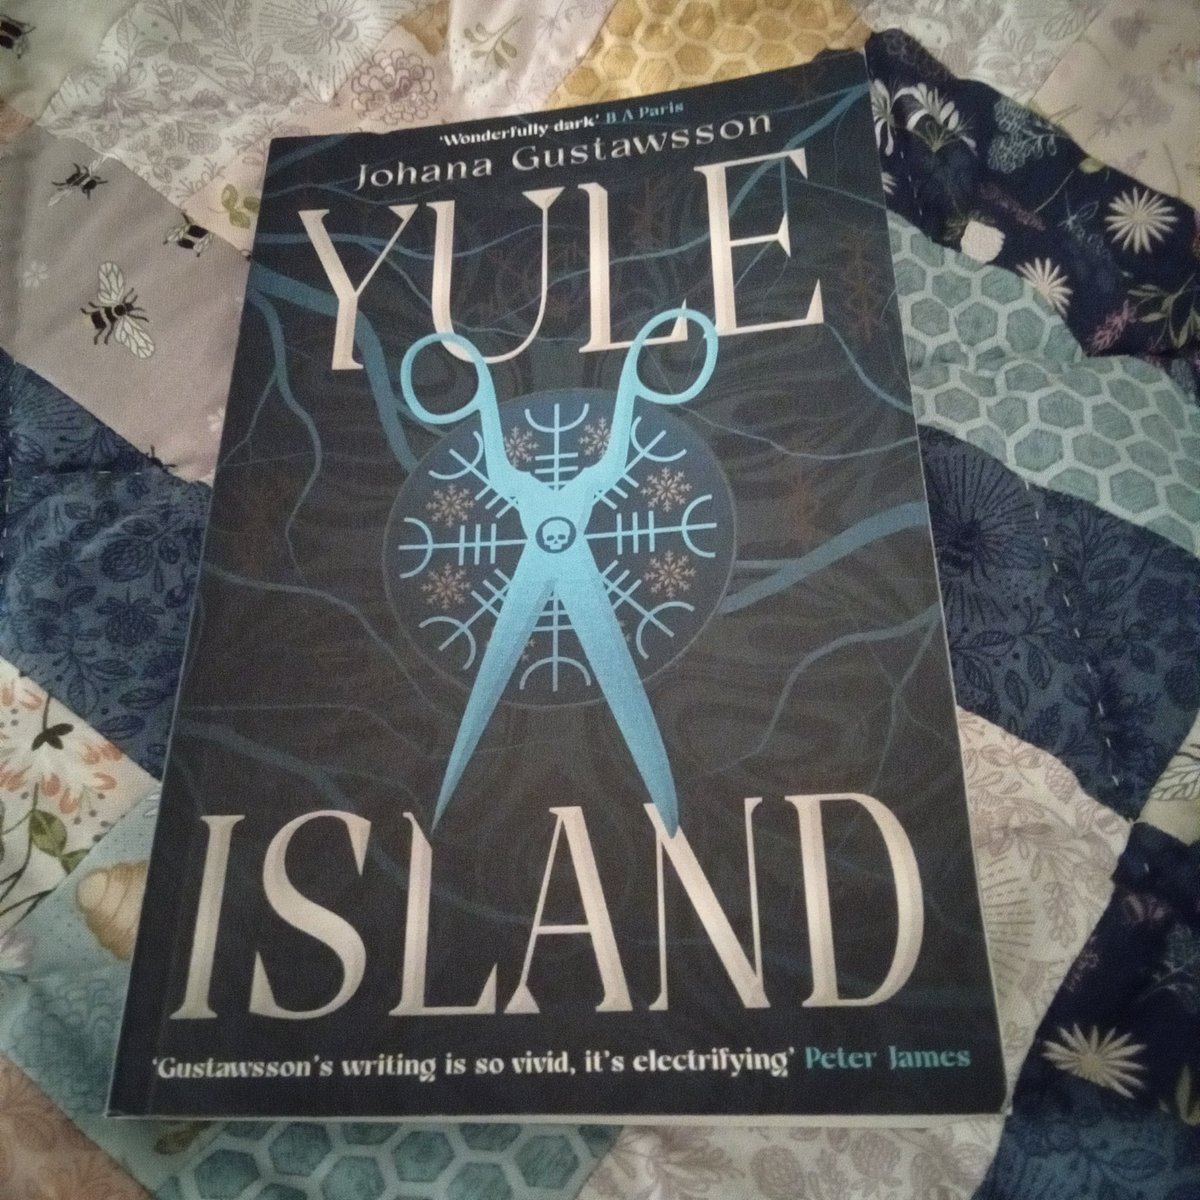 5 massive stars to @JoGustawsson for her new book, #YuleIsland. Its a real humdinger of a novel with twists and turns I never saw coming. This lady can do no wrong in my eyes. Brilliant storytelling and plots so cleverly thought out. Published by @OrendaBooks in December .